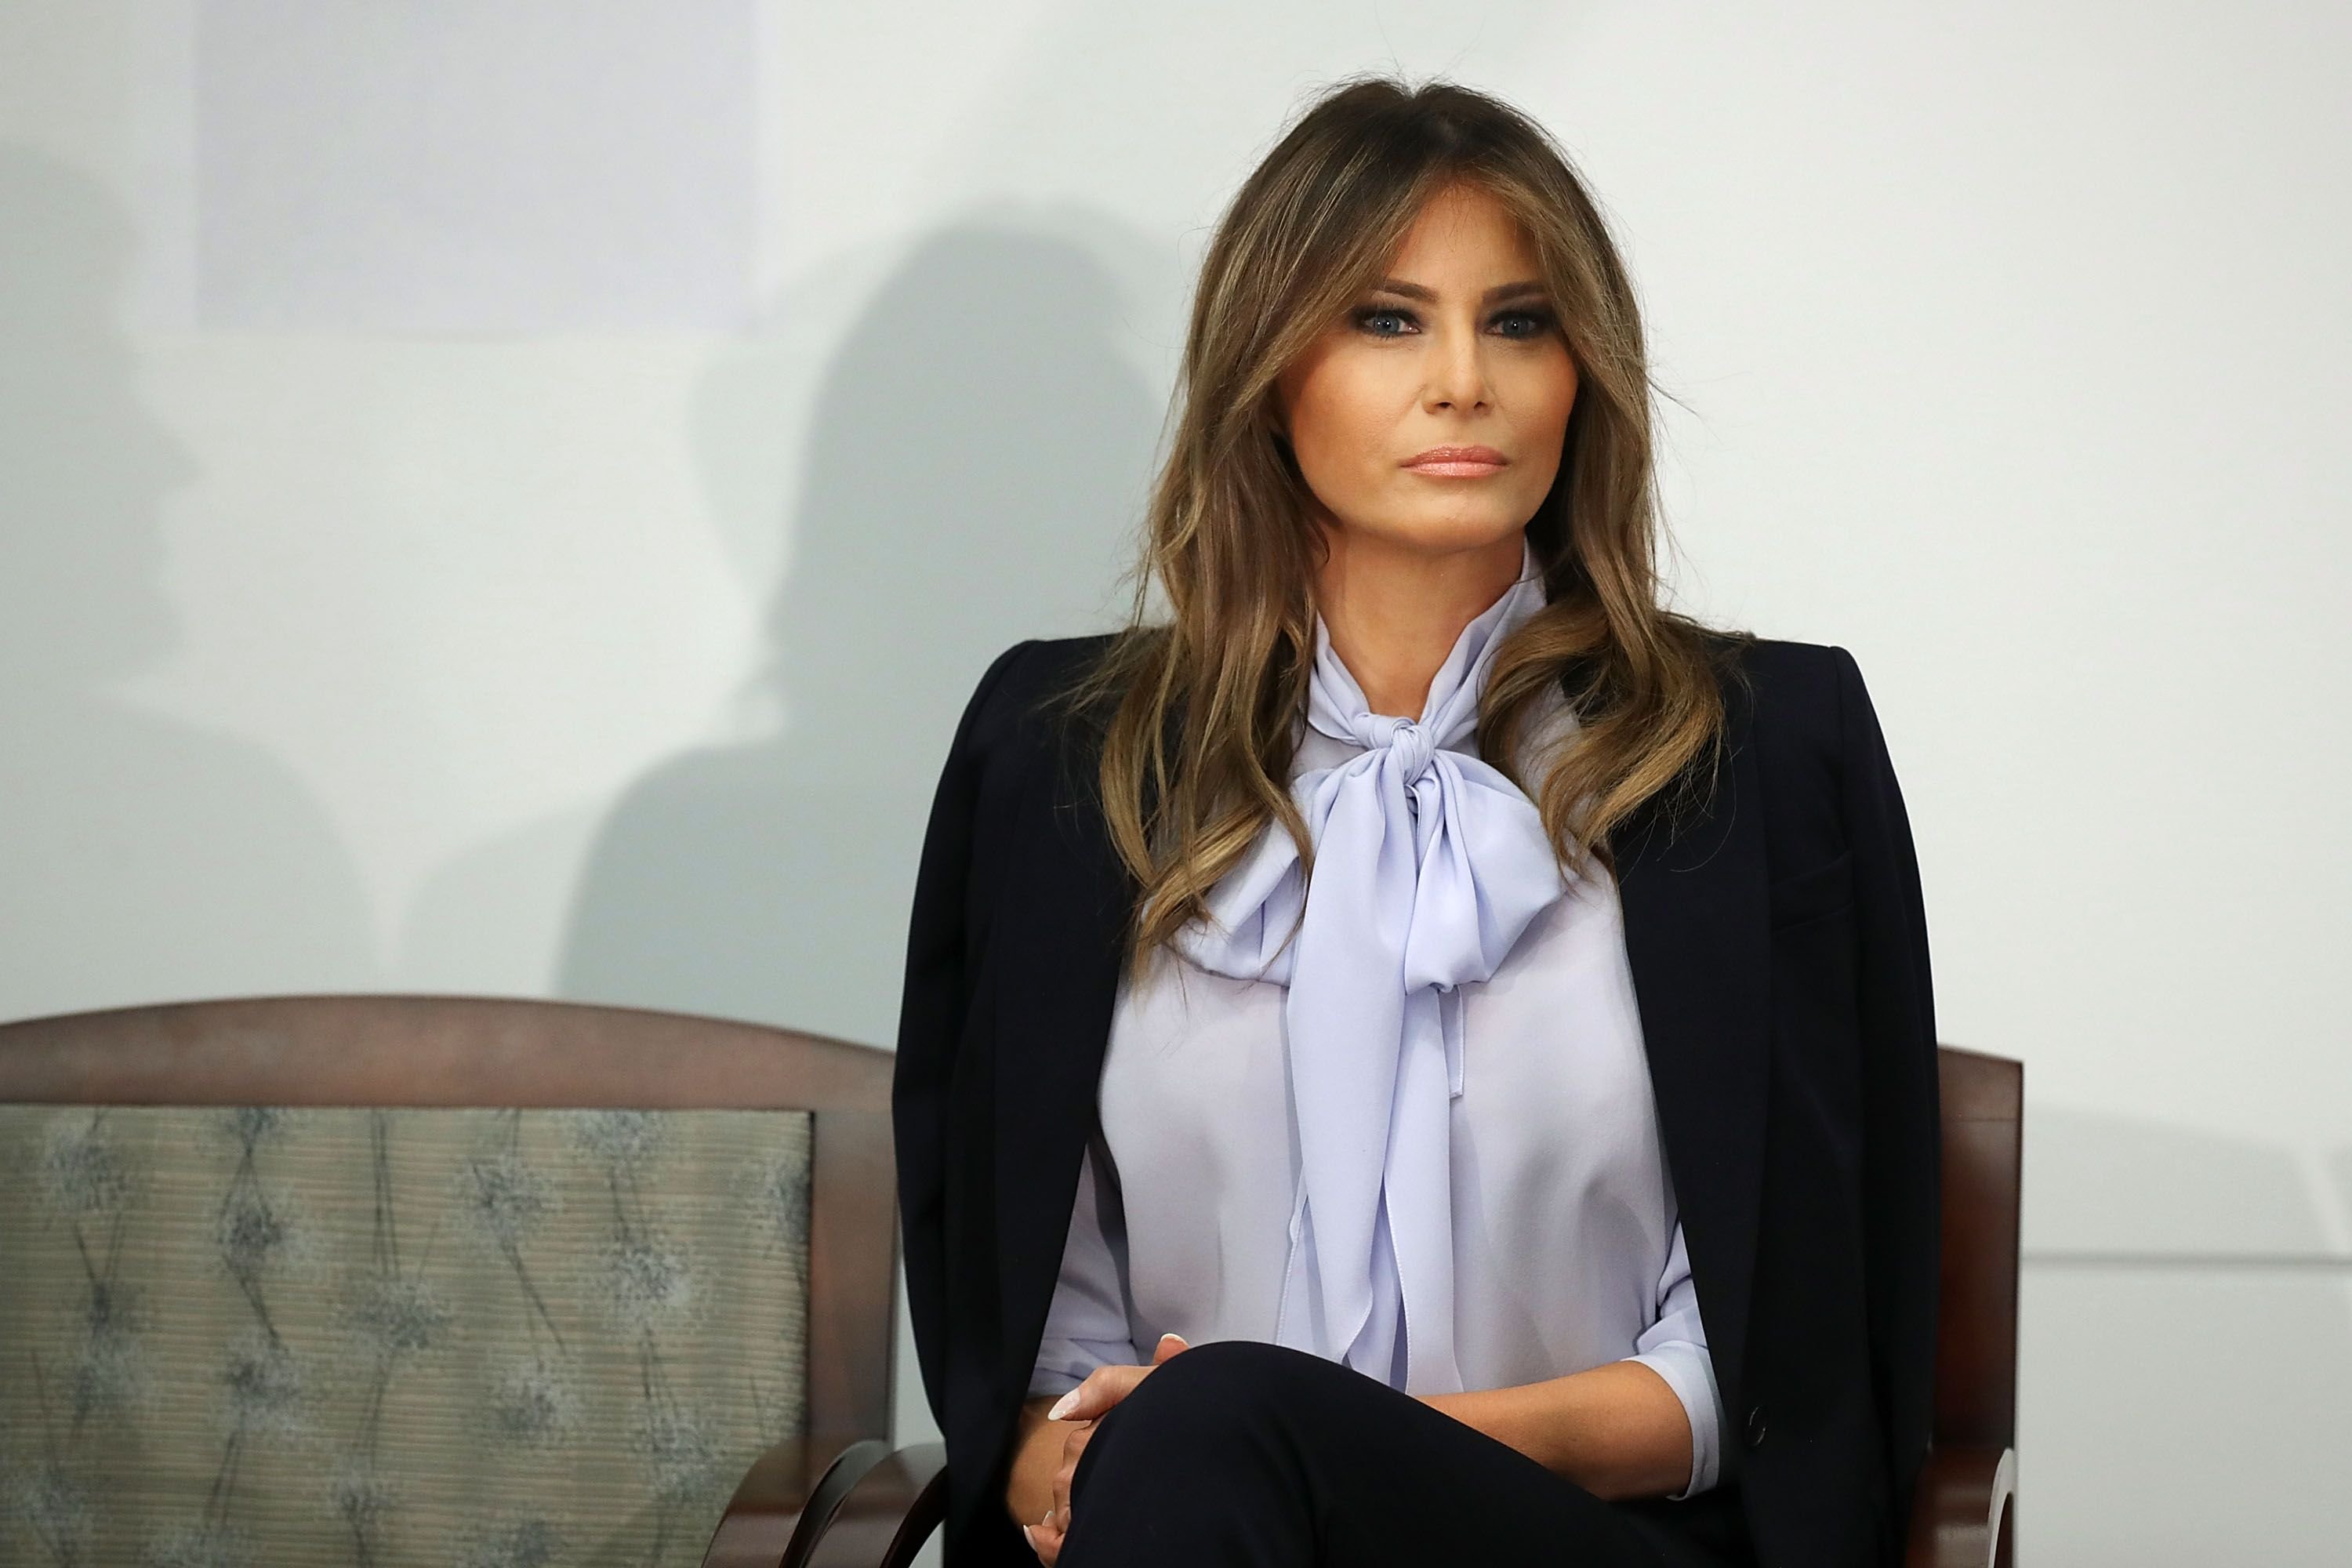 Melania Trump at a Federal Partners in Bullying Prevention summit at the Health Resources and Service Administration on August 20, 2018. | Photo: Getty images